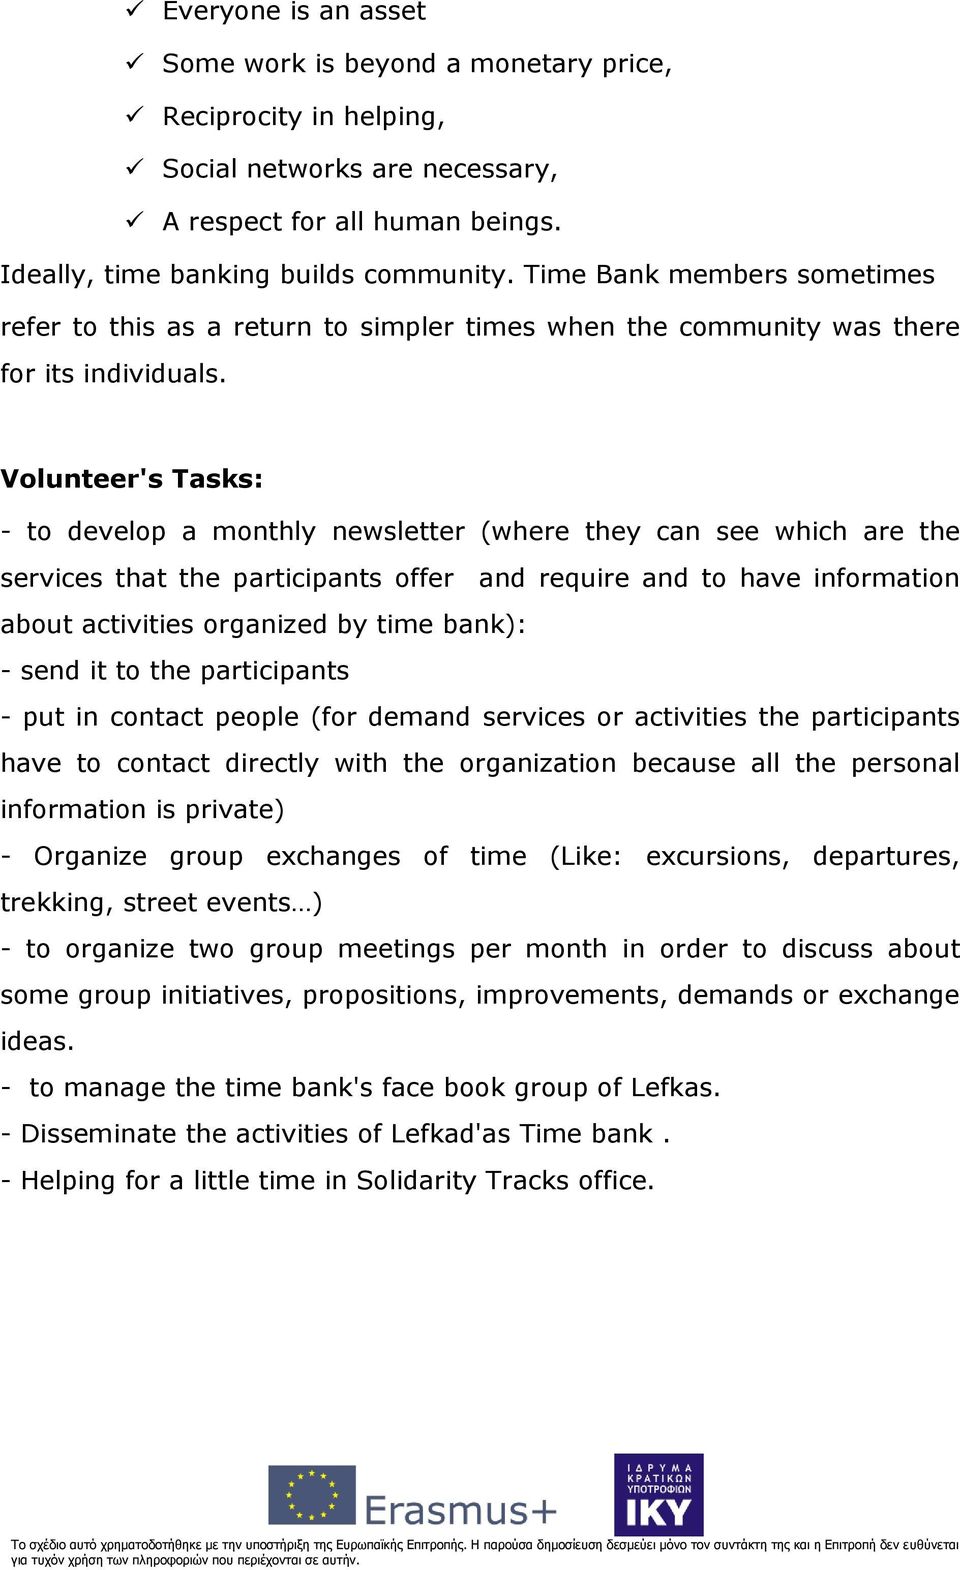 Volunteer's Tasks: - to develop a monthly newsletter (where they can see which are the services that the participants offer and require and to have information about activities organized by time